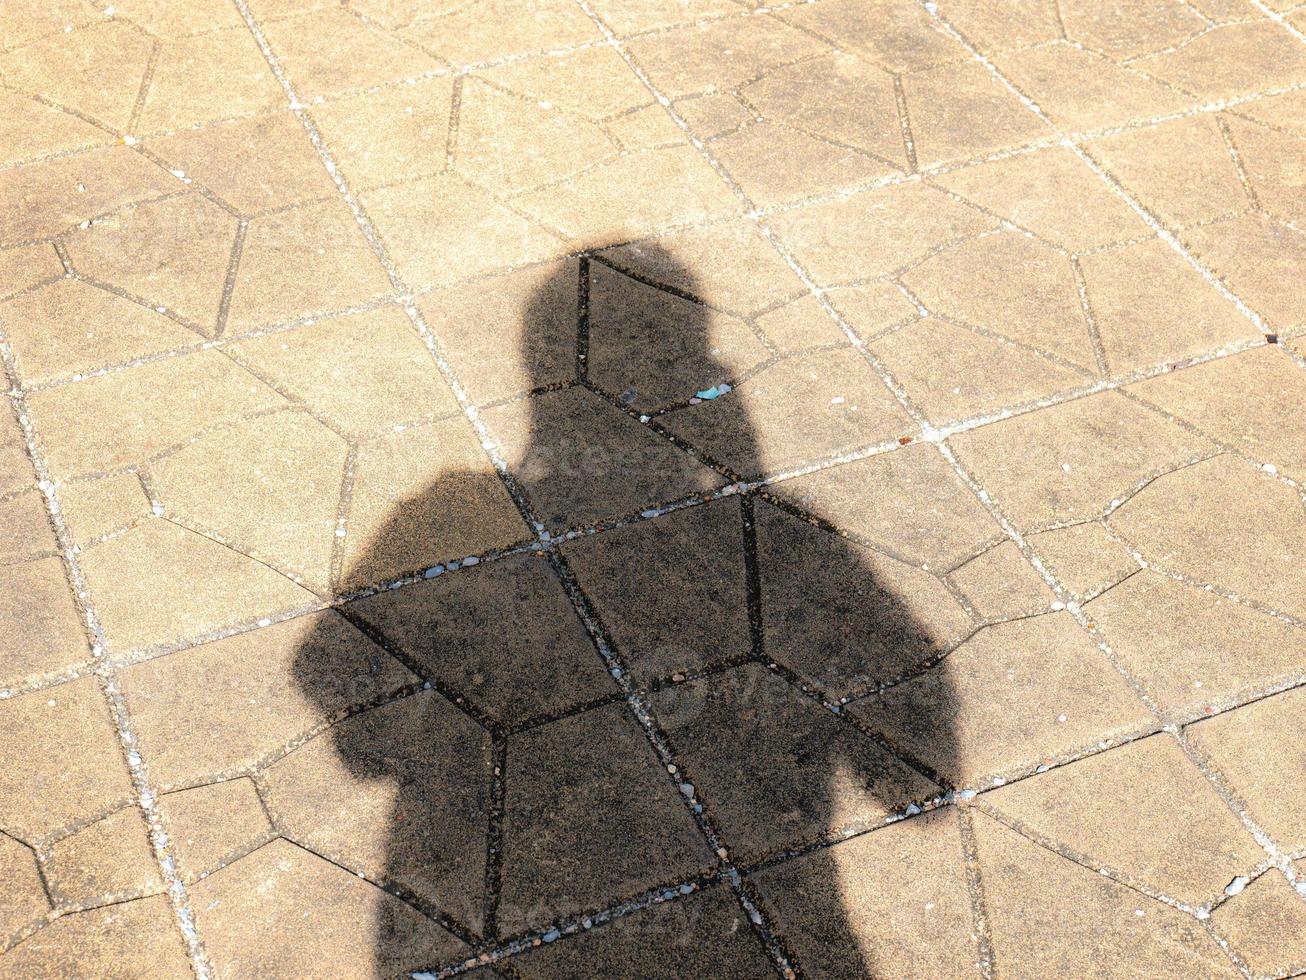 Take a shadow of yourself on the road Shadows against sunlight create a dark shape. showing different surfaces photo